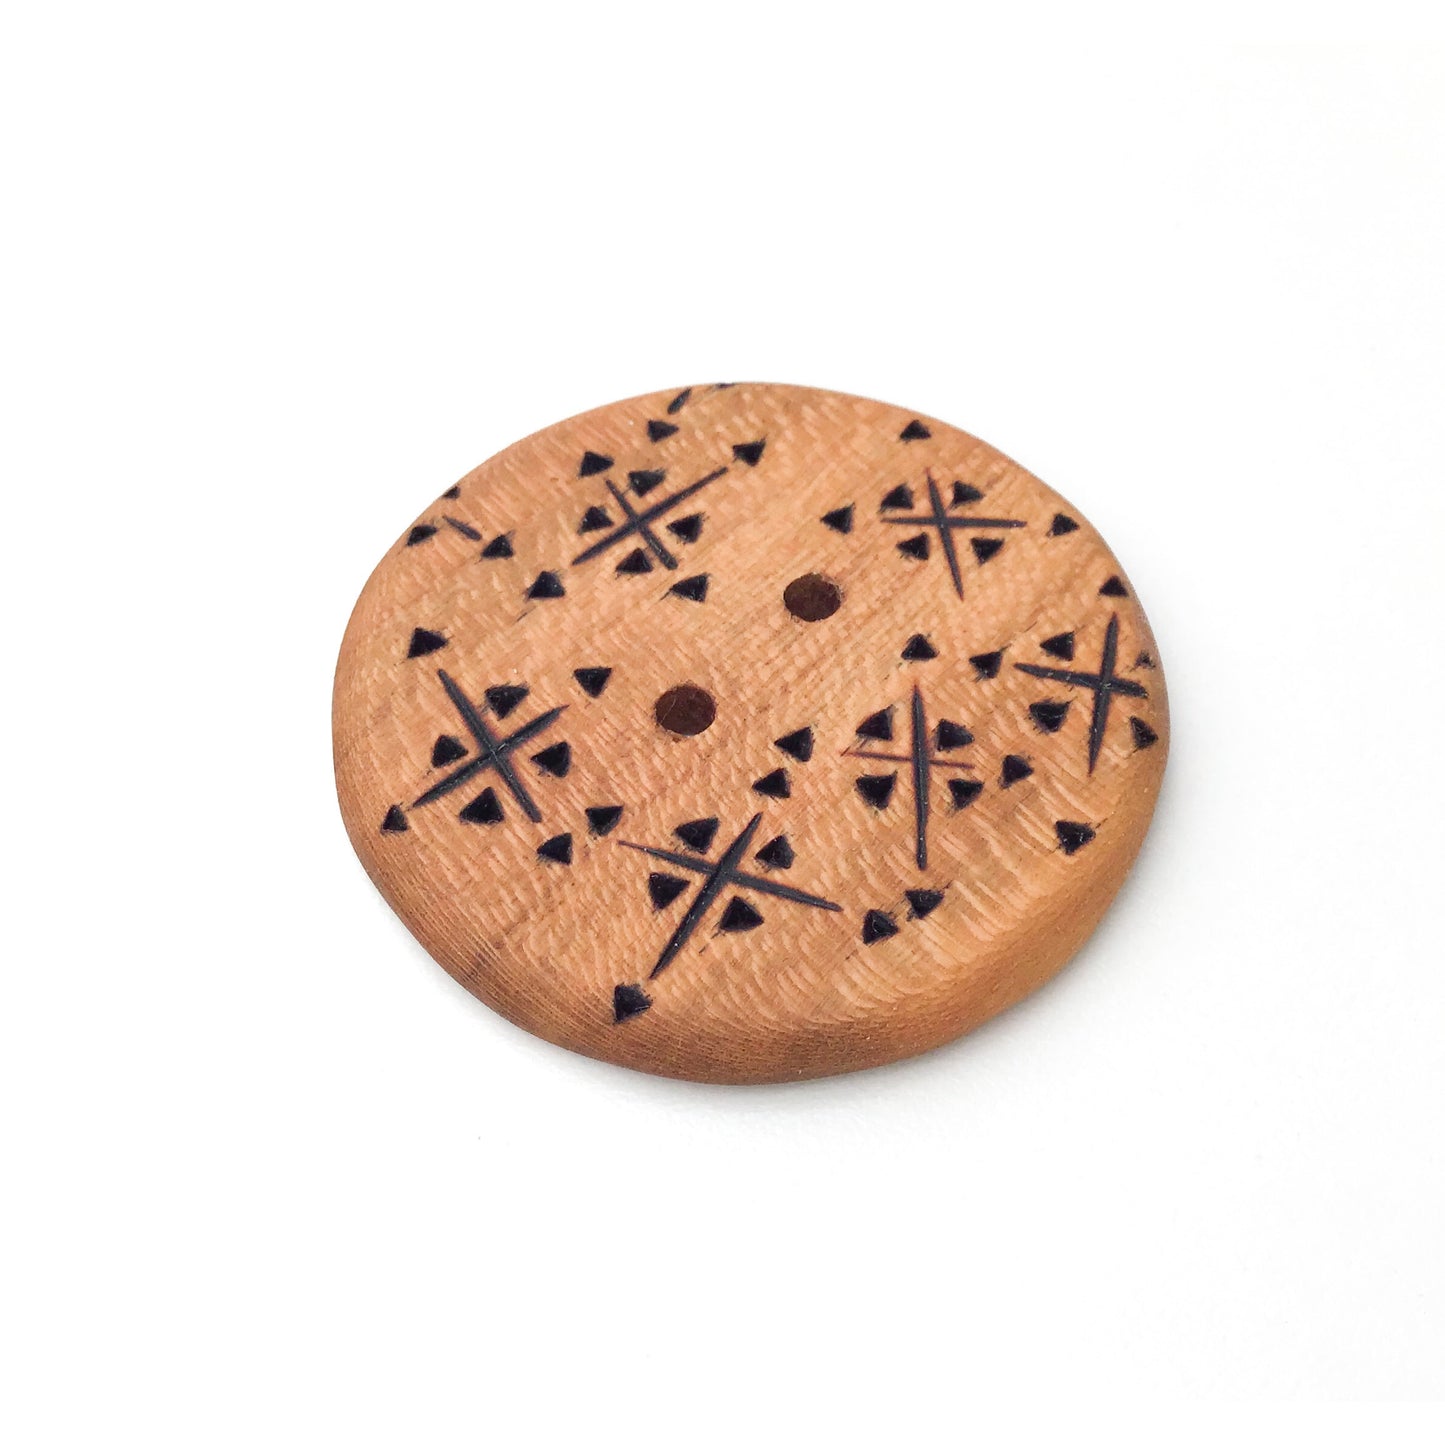 Extra Large Cherry Wood Button - Decorative Wood Button - Pyrography - 1 13/16"